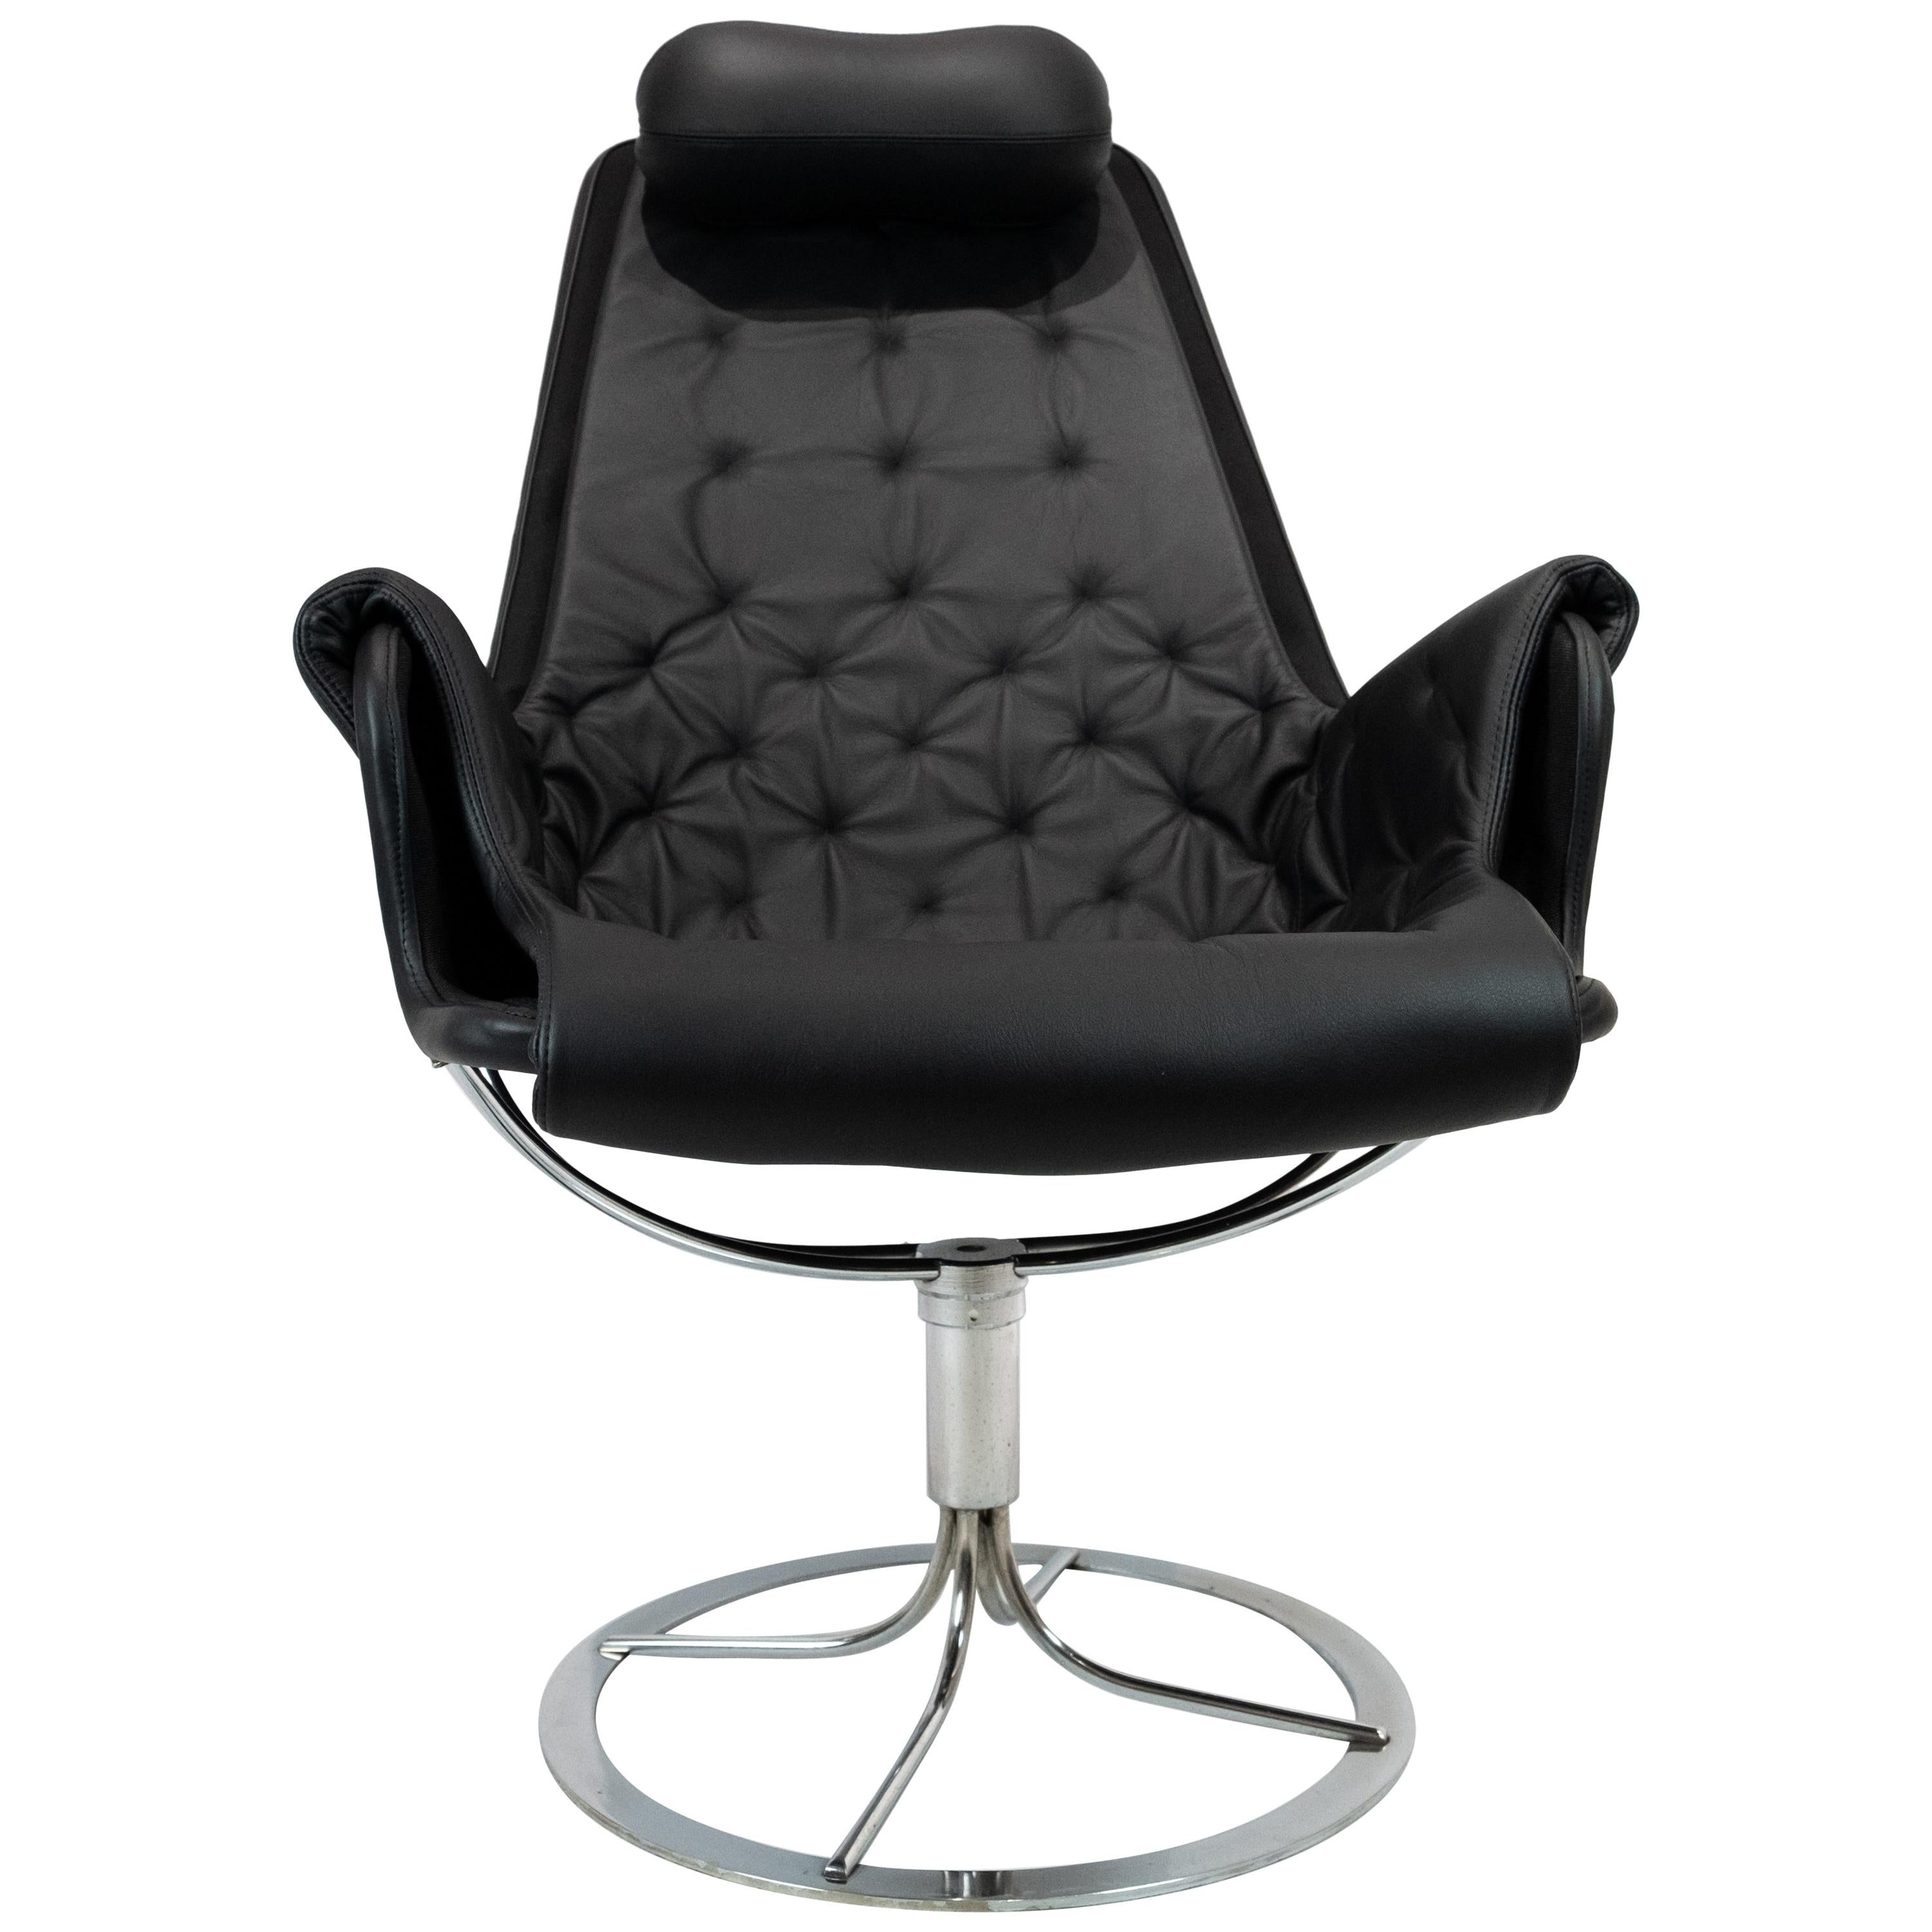 Easy Chair, Model Jetson 69, in Black Leather Designed by Bruno Mathsson, 1970s